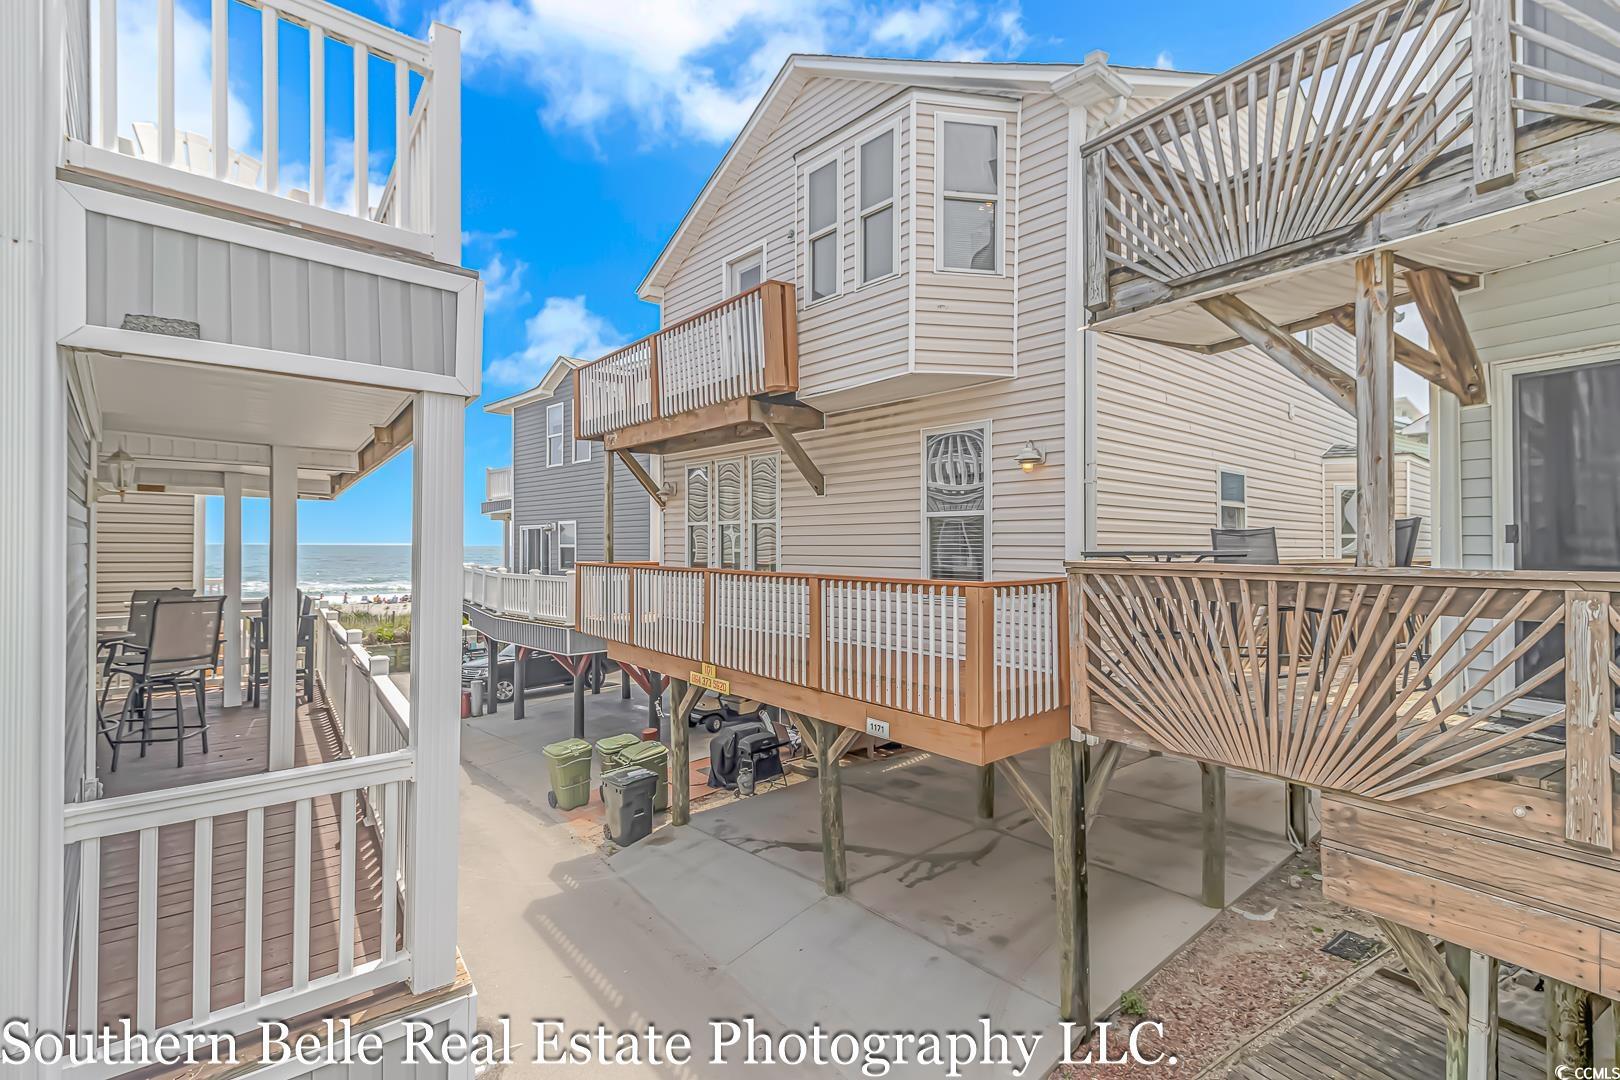 one of the few 7 bedroom 3 bath raised beach house in ocean lakes, 2nd house from the ocean!  amazing views of the ocean from the 4 decks, 6 of the 7 bedrooms have deck access with ocean views.  main level has a large living room, dining area, breakfast bar, and modern kitchen with granite counters and stainless steel appliances. full size washer and dryer located on the first floor.  1 full bath on the 1st floor and 2 bedrooms with their own access to the deck.  upstairs you will have 5 additional bedrooms and 2 full baths.  4 of the 5 bedrooms have access to the deck with ocean views.  home is being sold fully furnished.  both hvac units were replaced in 2022.  home has recently been remodeled to include stainless steel appliances, granite counters, lvp flooring in the living room, kitchen, and dining area along with updated fixtures.